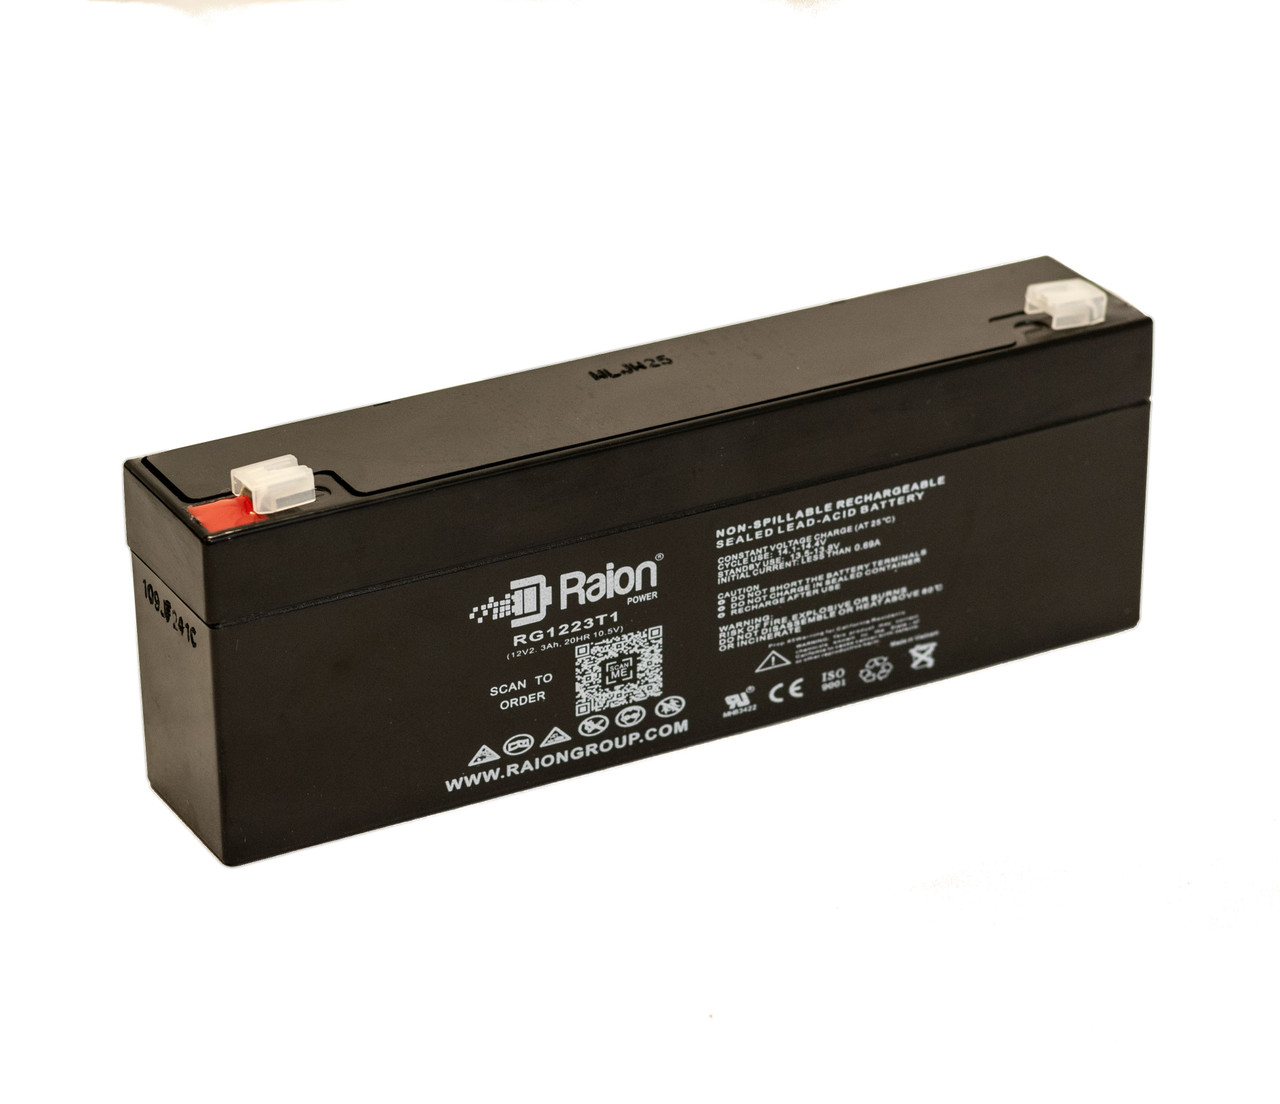 Raion Power RG1223T1 Replacement Battery for Avi 200 INF Pump